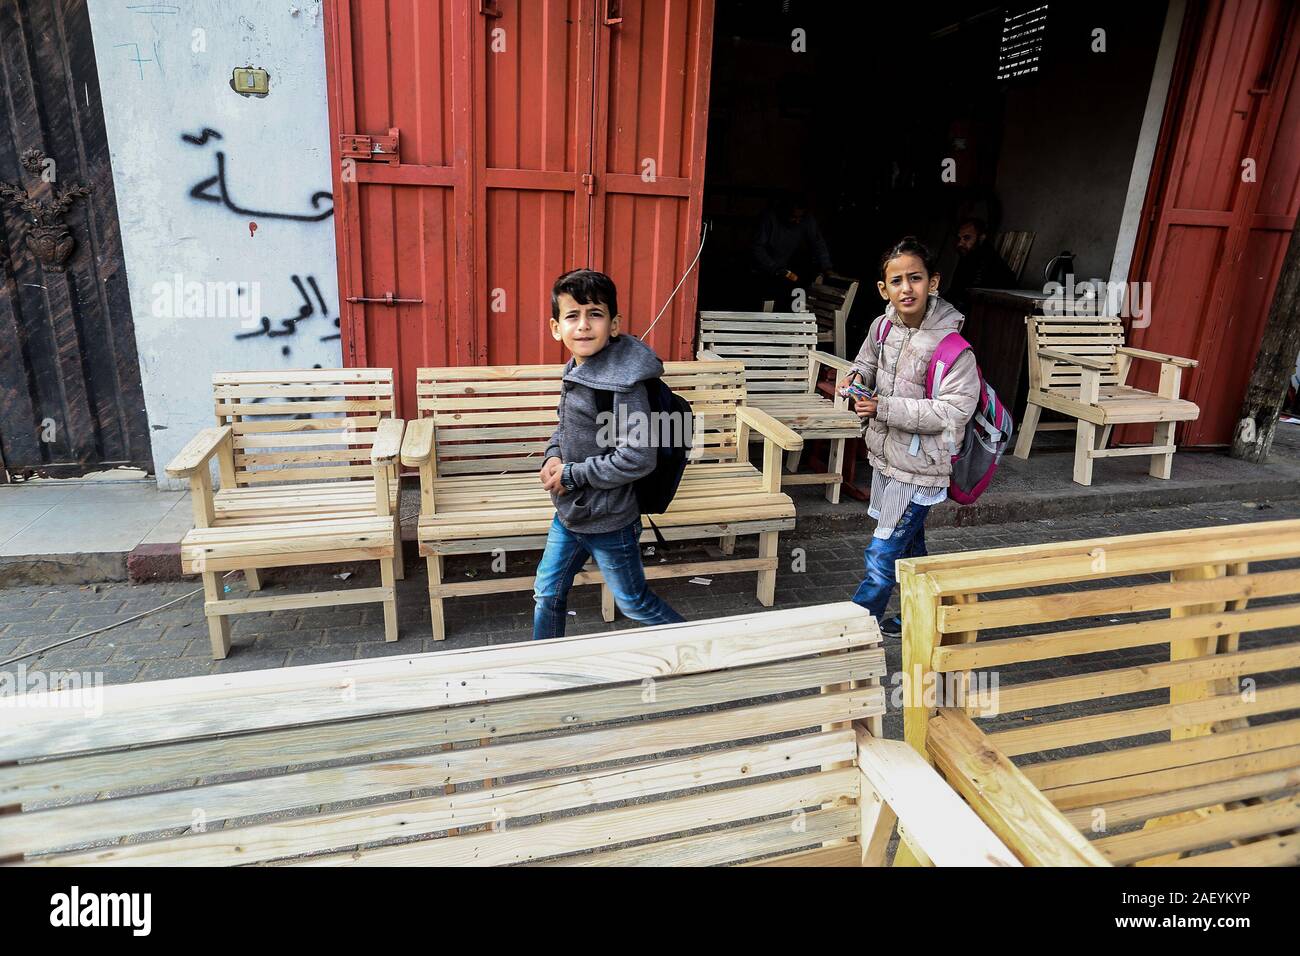 Palestinian man makes chairs from used wood, due to their inability to purchase new wood because of the deteriorating economic, in Gaza Strip. Stock Photo